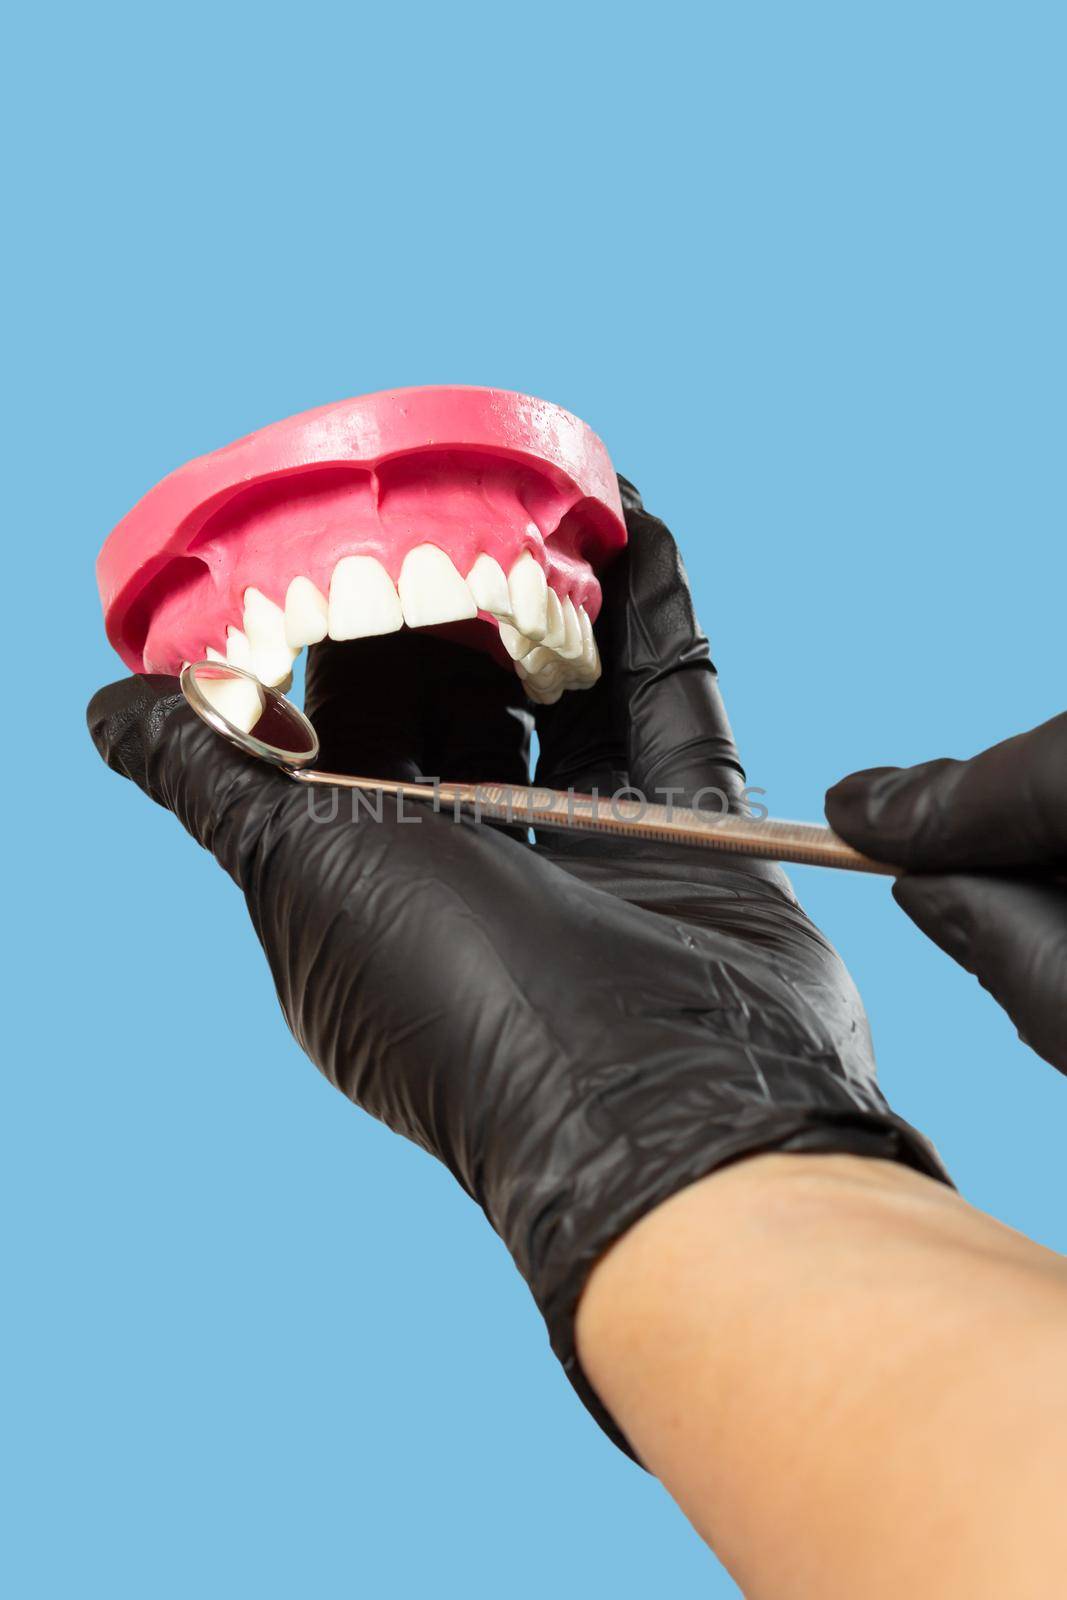 Dentist with a layout of the human jaw is examining teeth with mirror. Focus on stainless steel dental mirror.